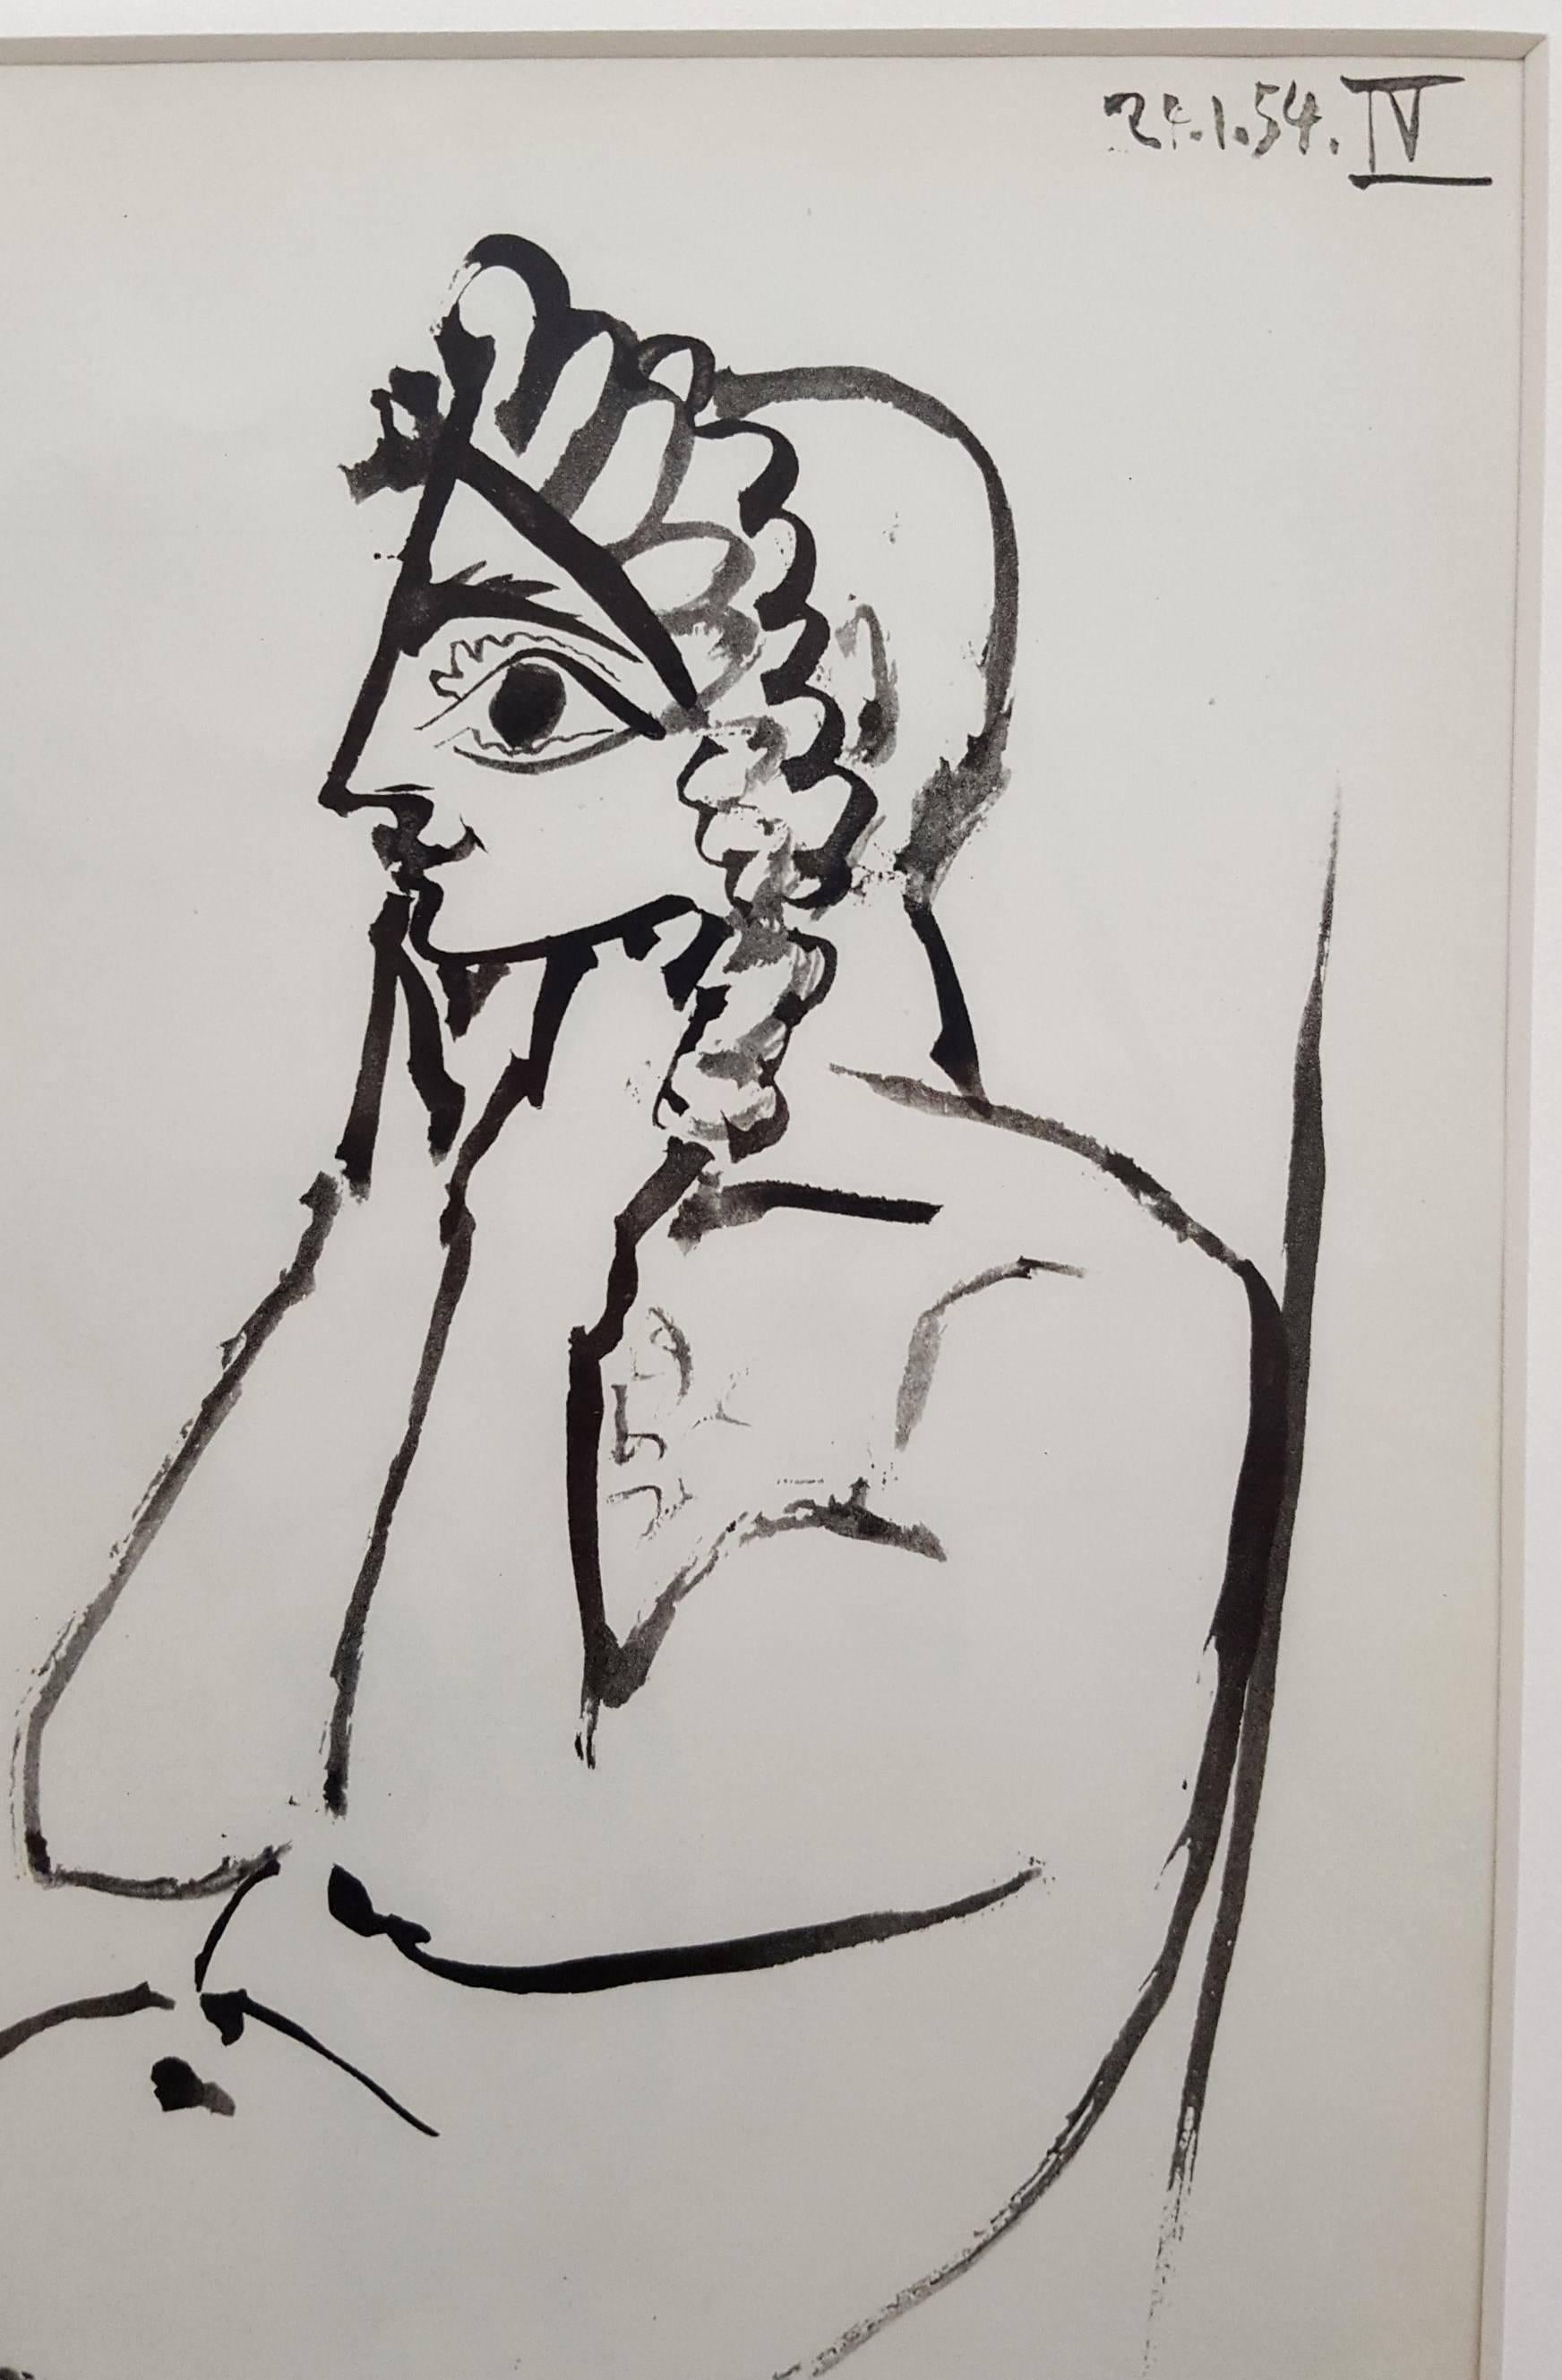 La Comedie Humaine - Cubist Print by (after) Pablo Picasso